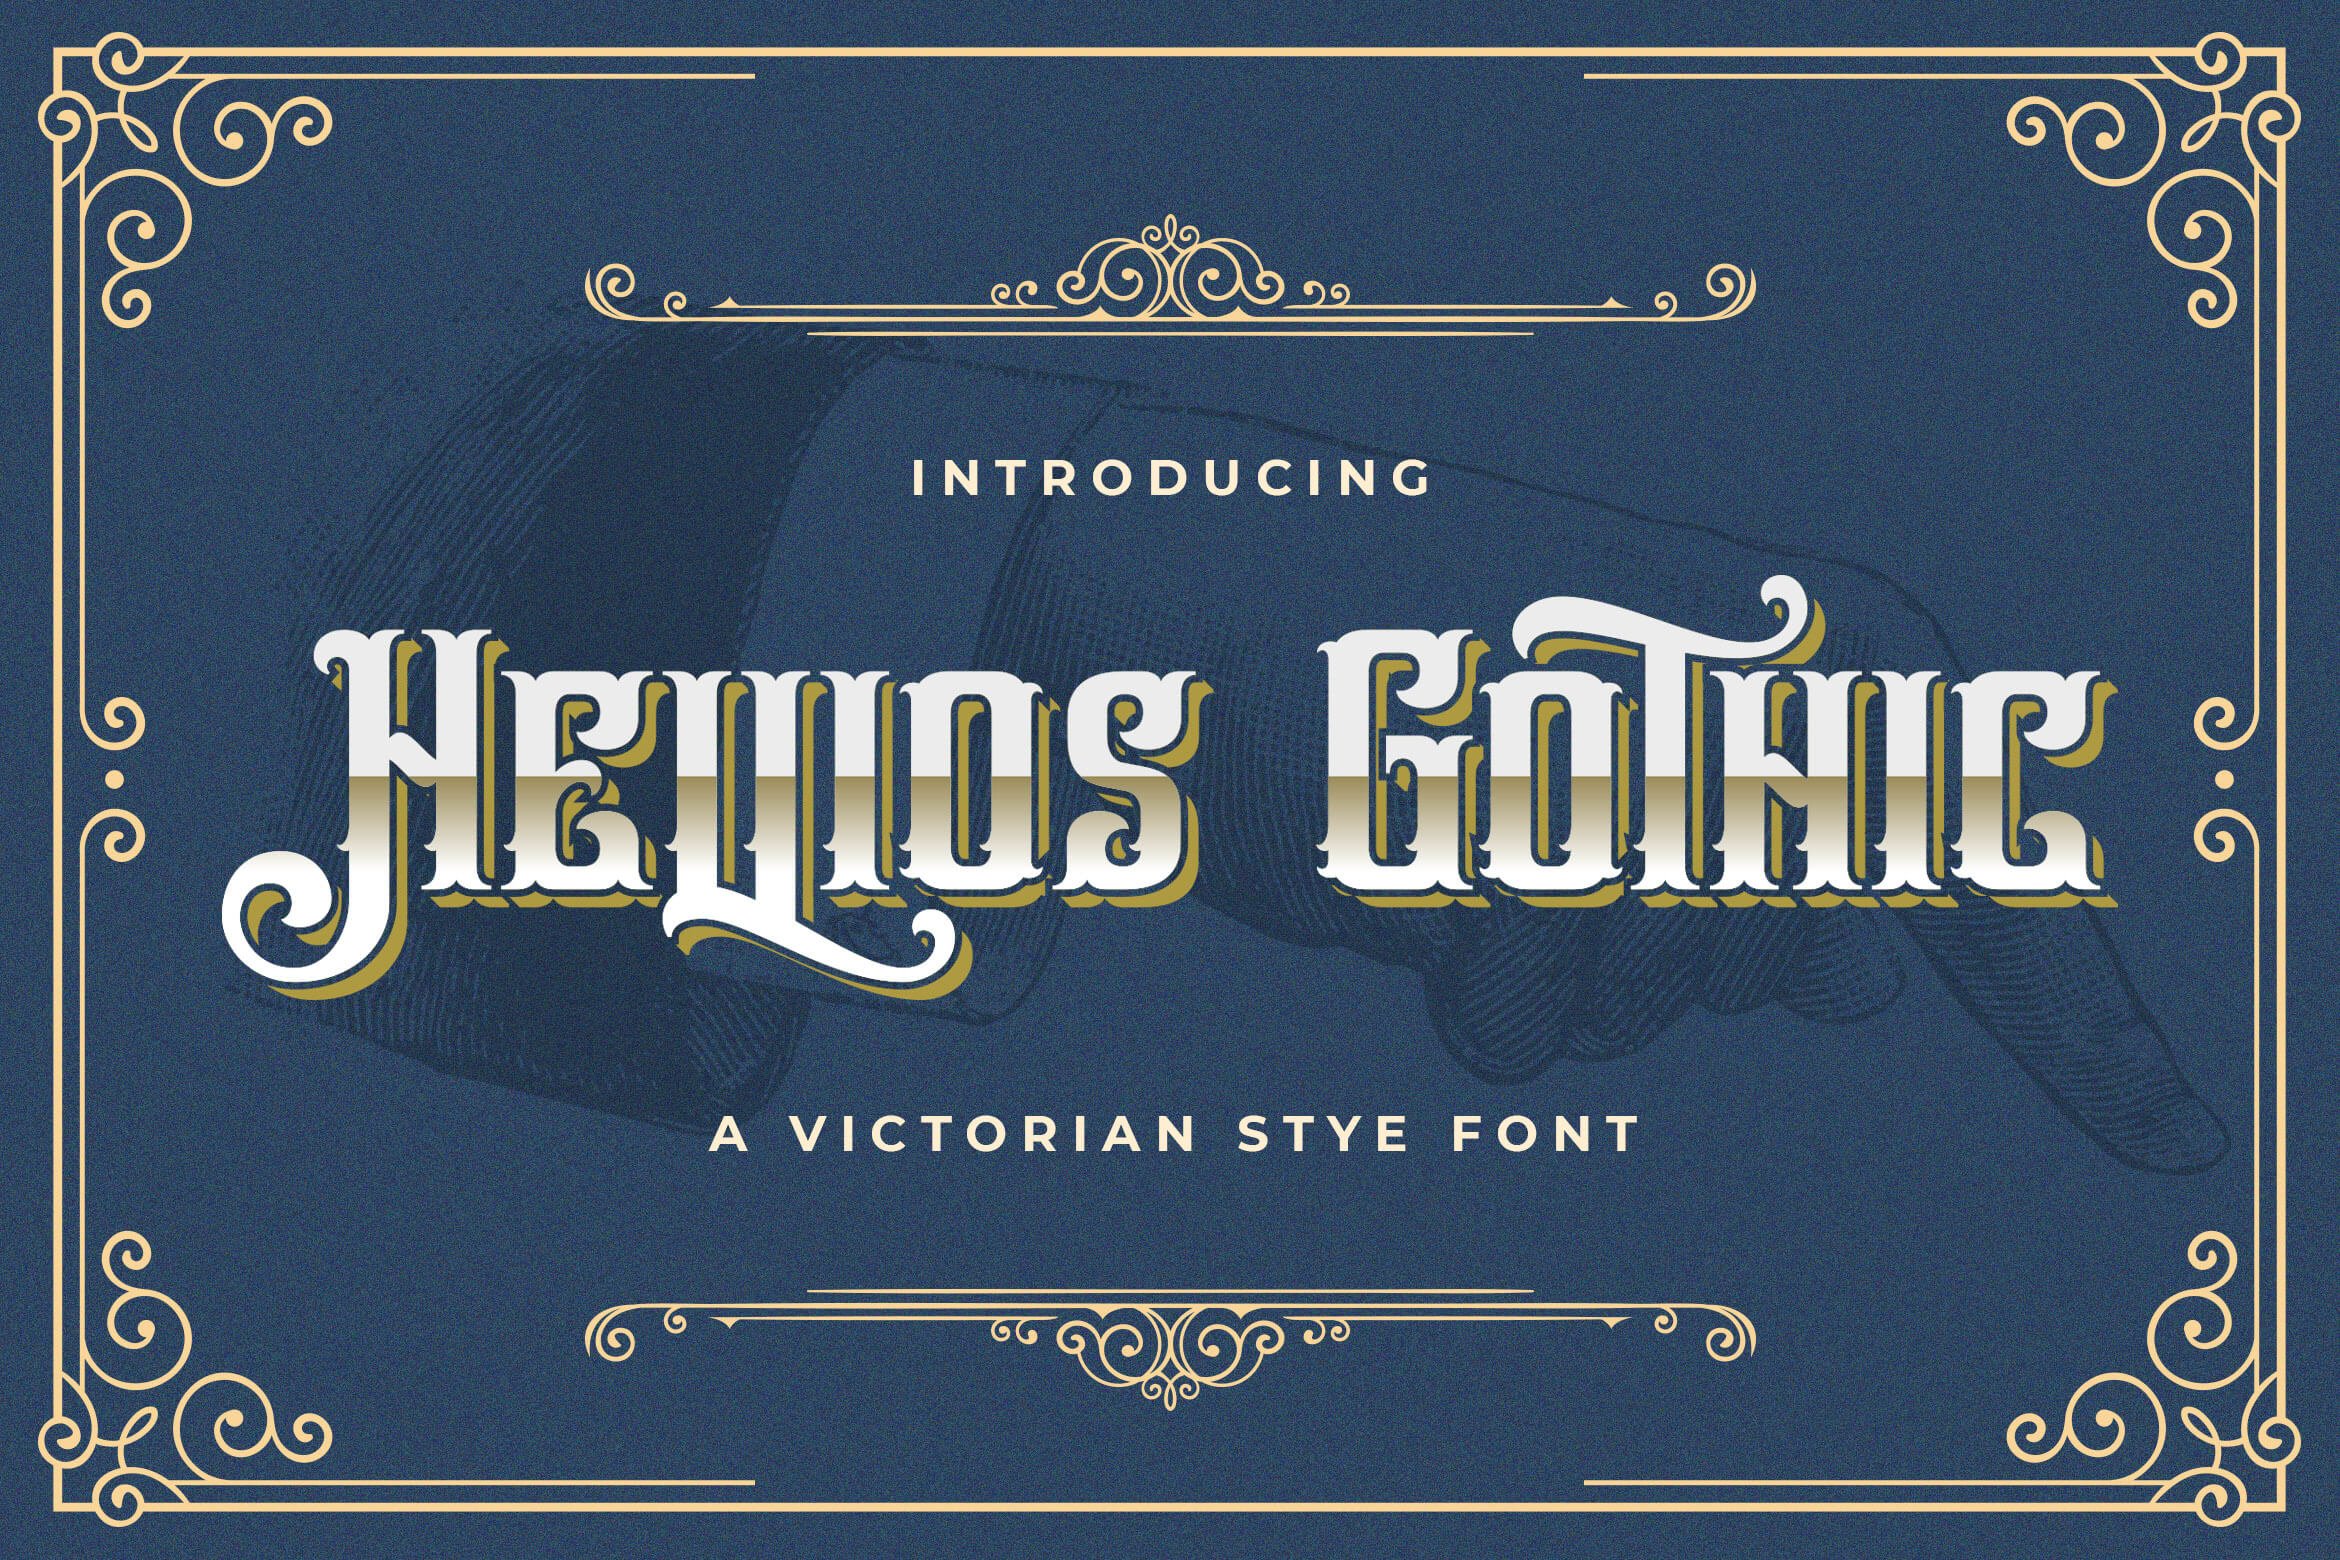 Hellios Gothic - Blackletter Font cover image.